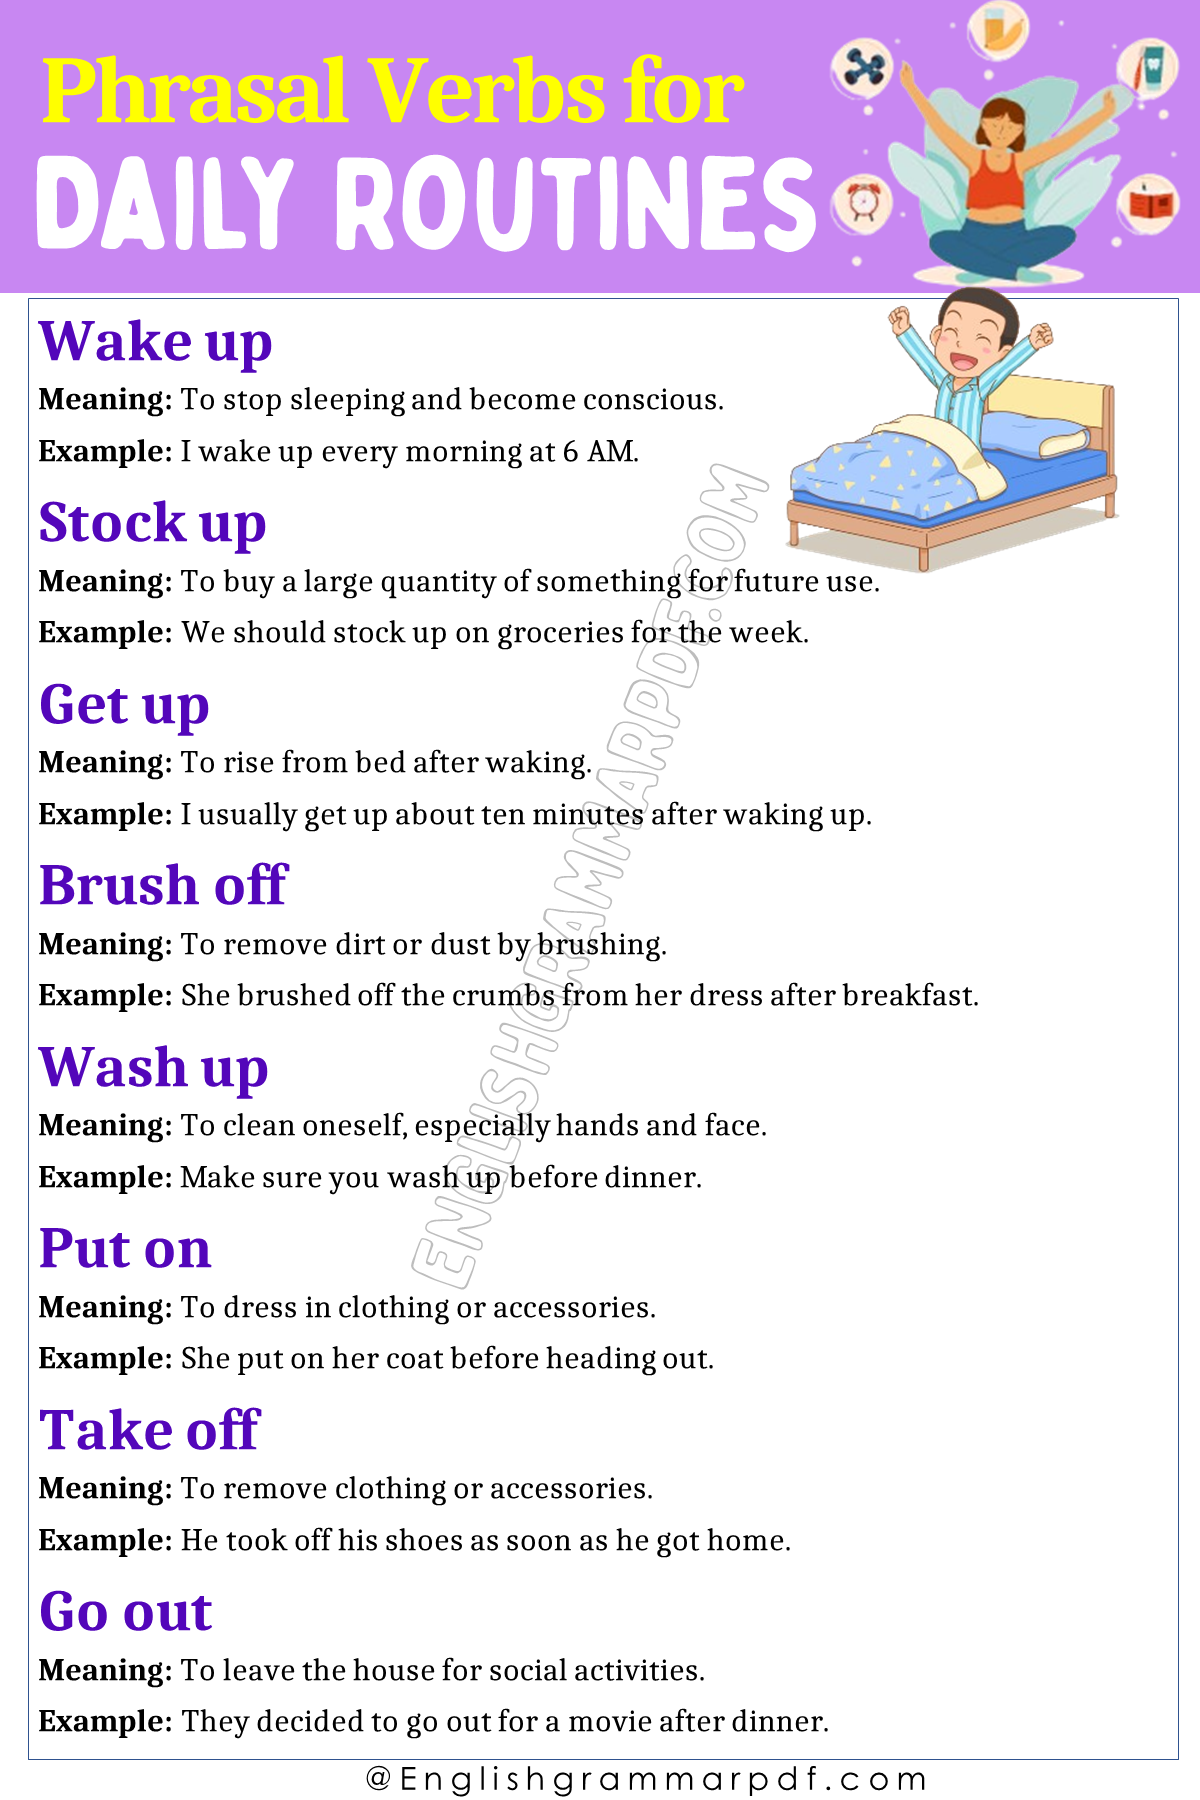 Phrasal Verbs for Daily Routines